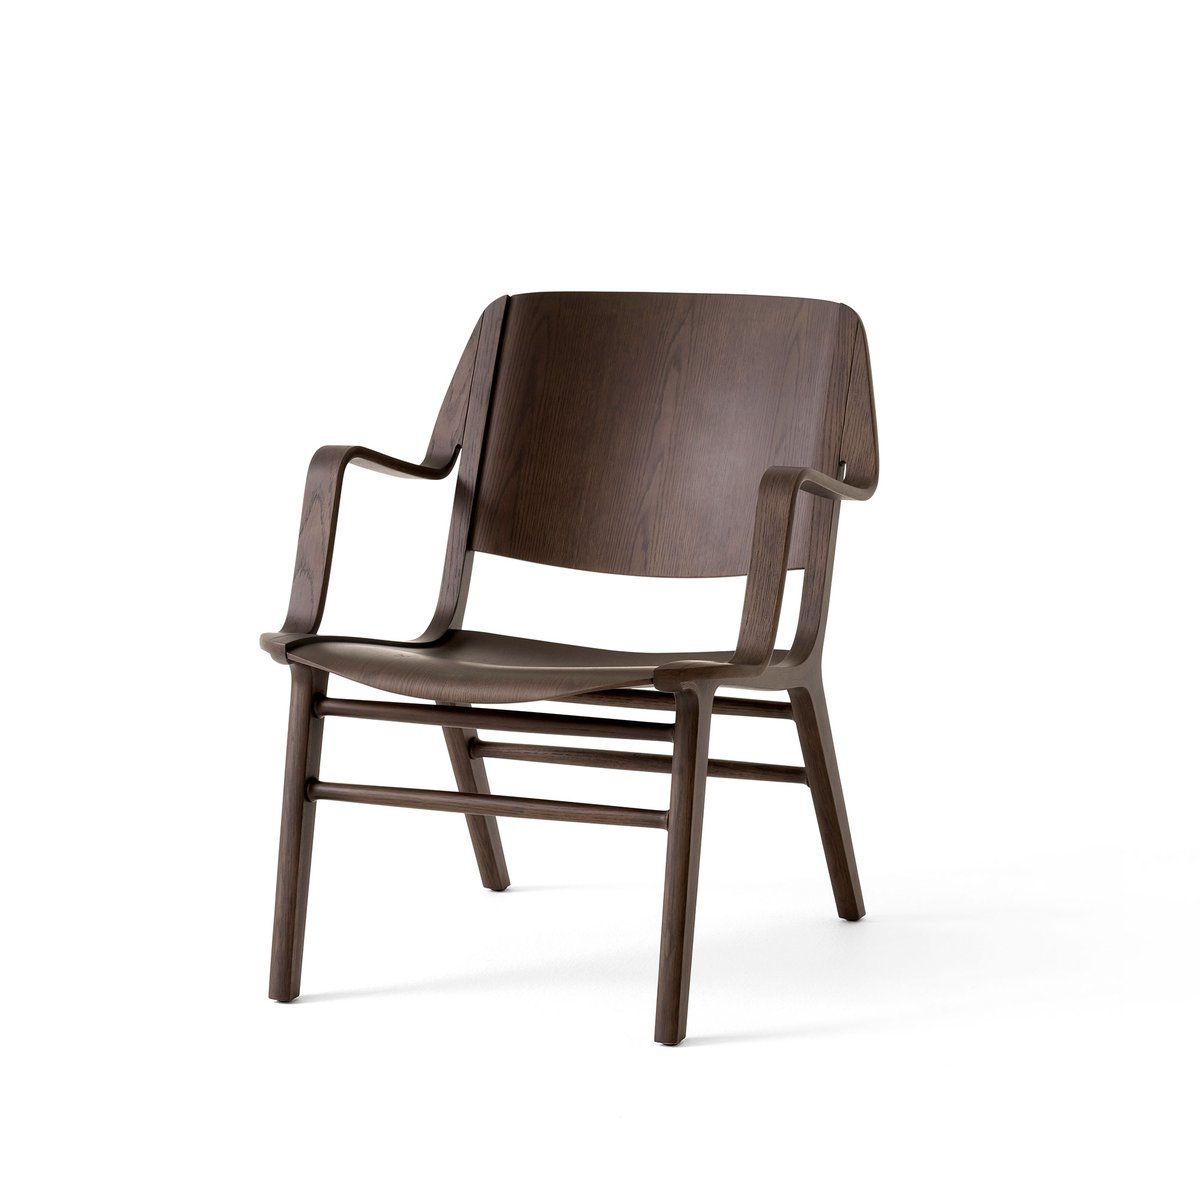 &Tradition AX HM11 Lounge Chair met armleuningen Dark stained oak